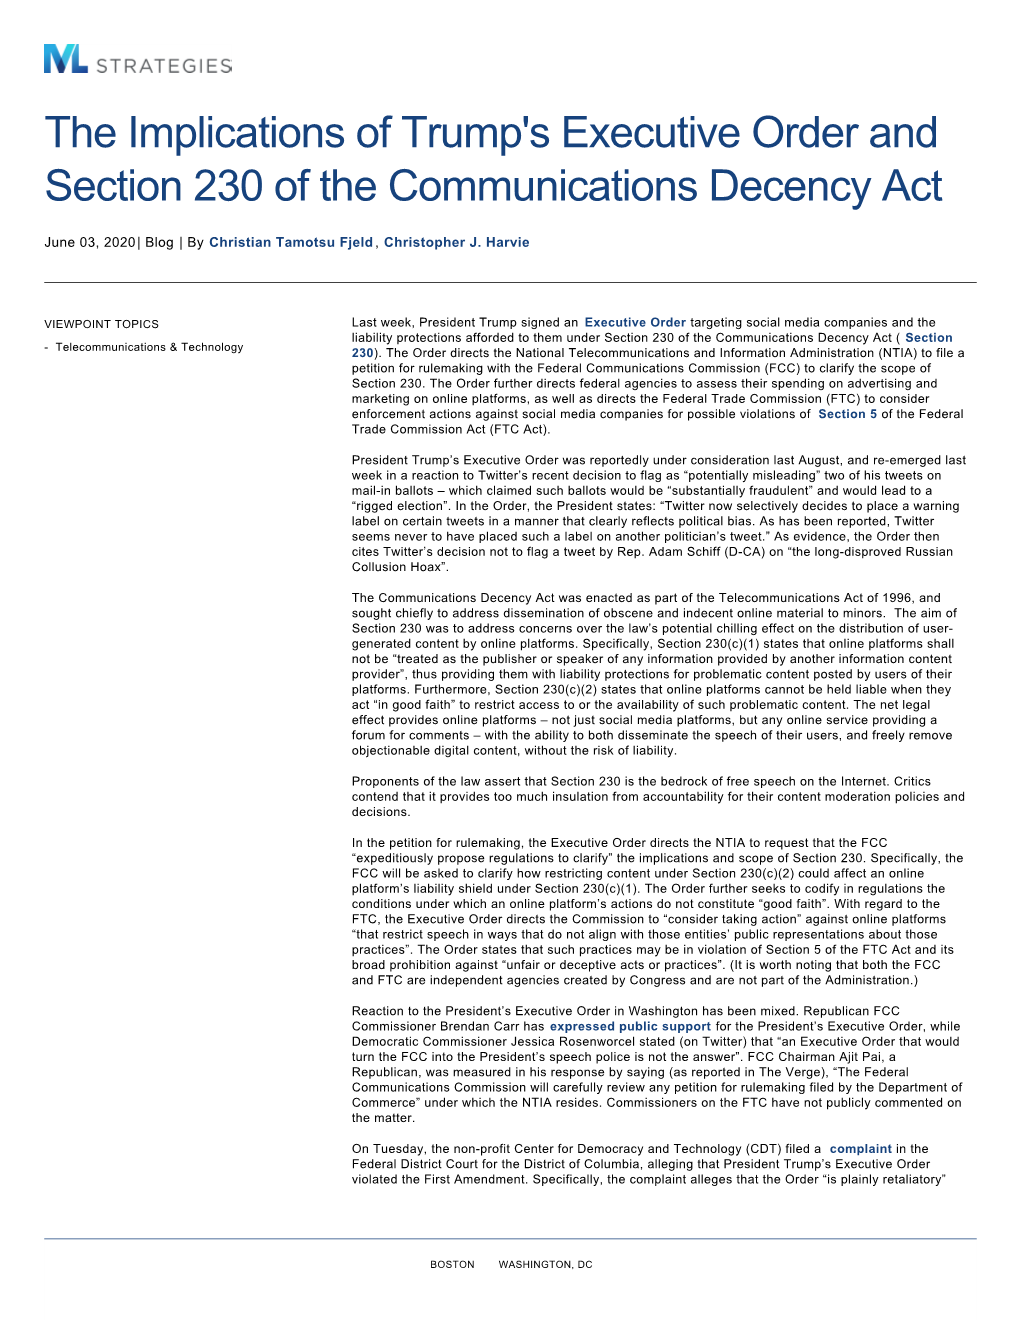 S Executive Order and Section 230 of the Communications Decency Act